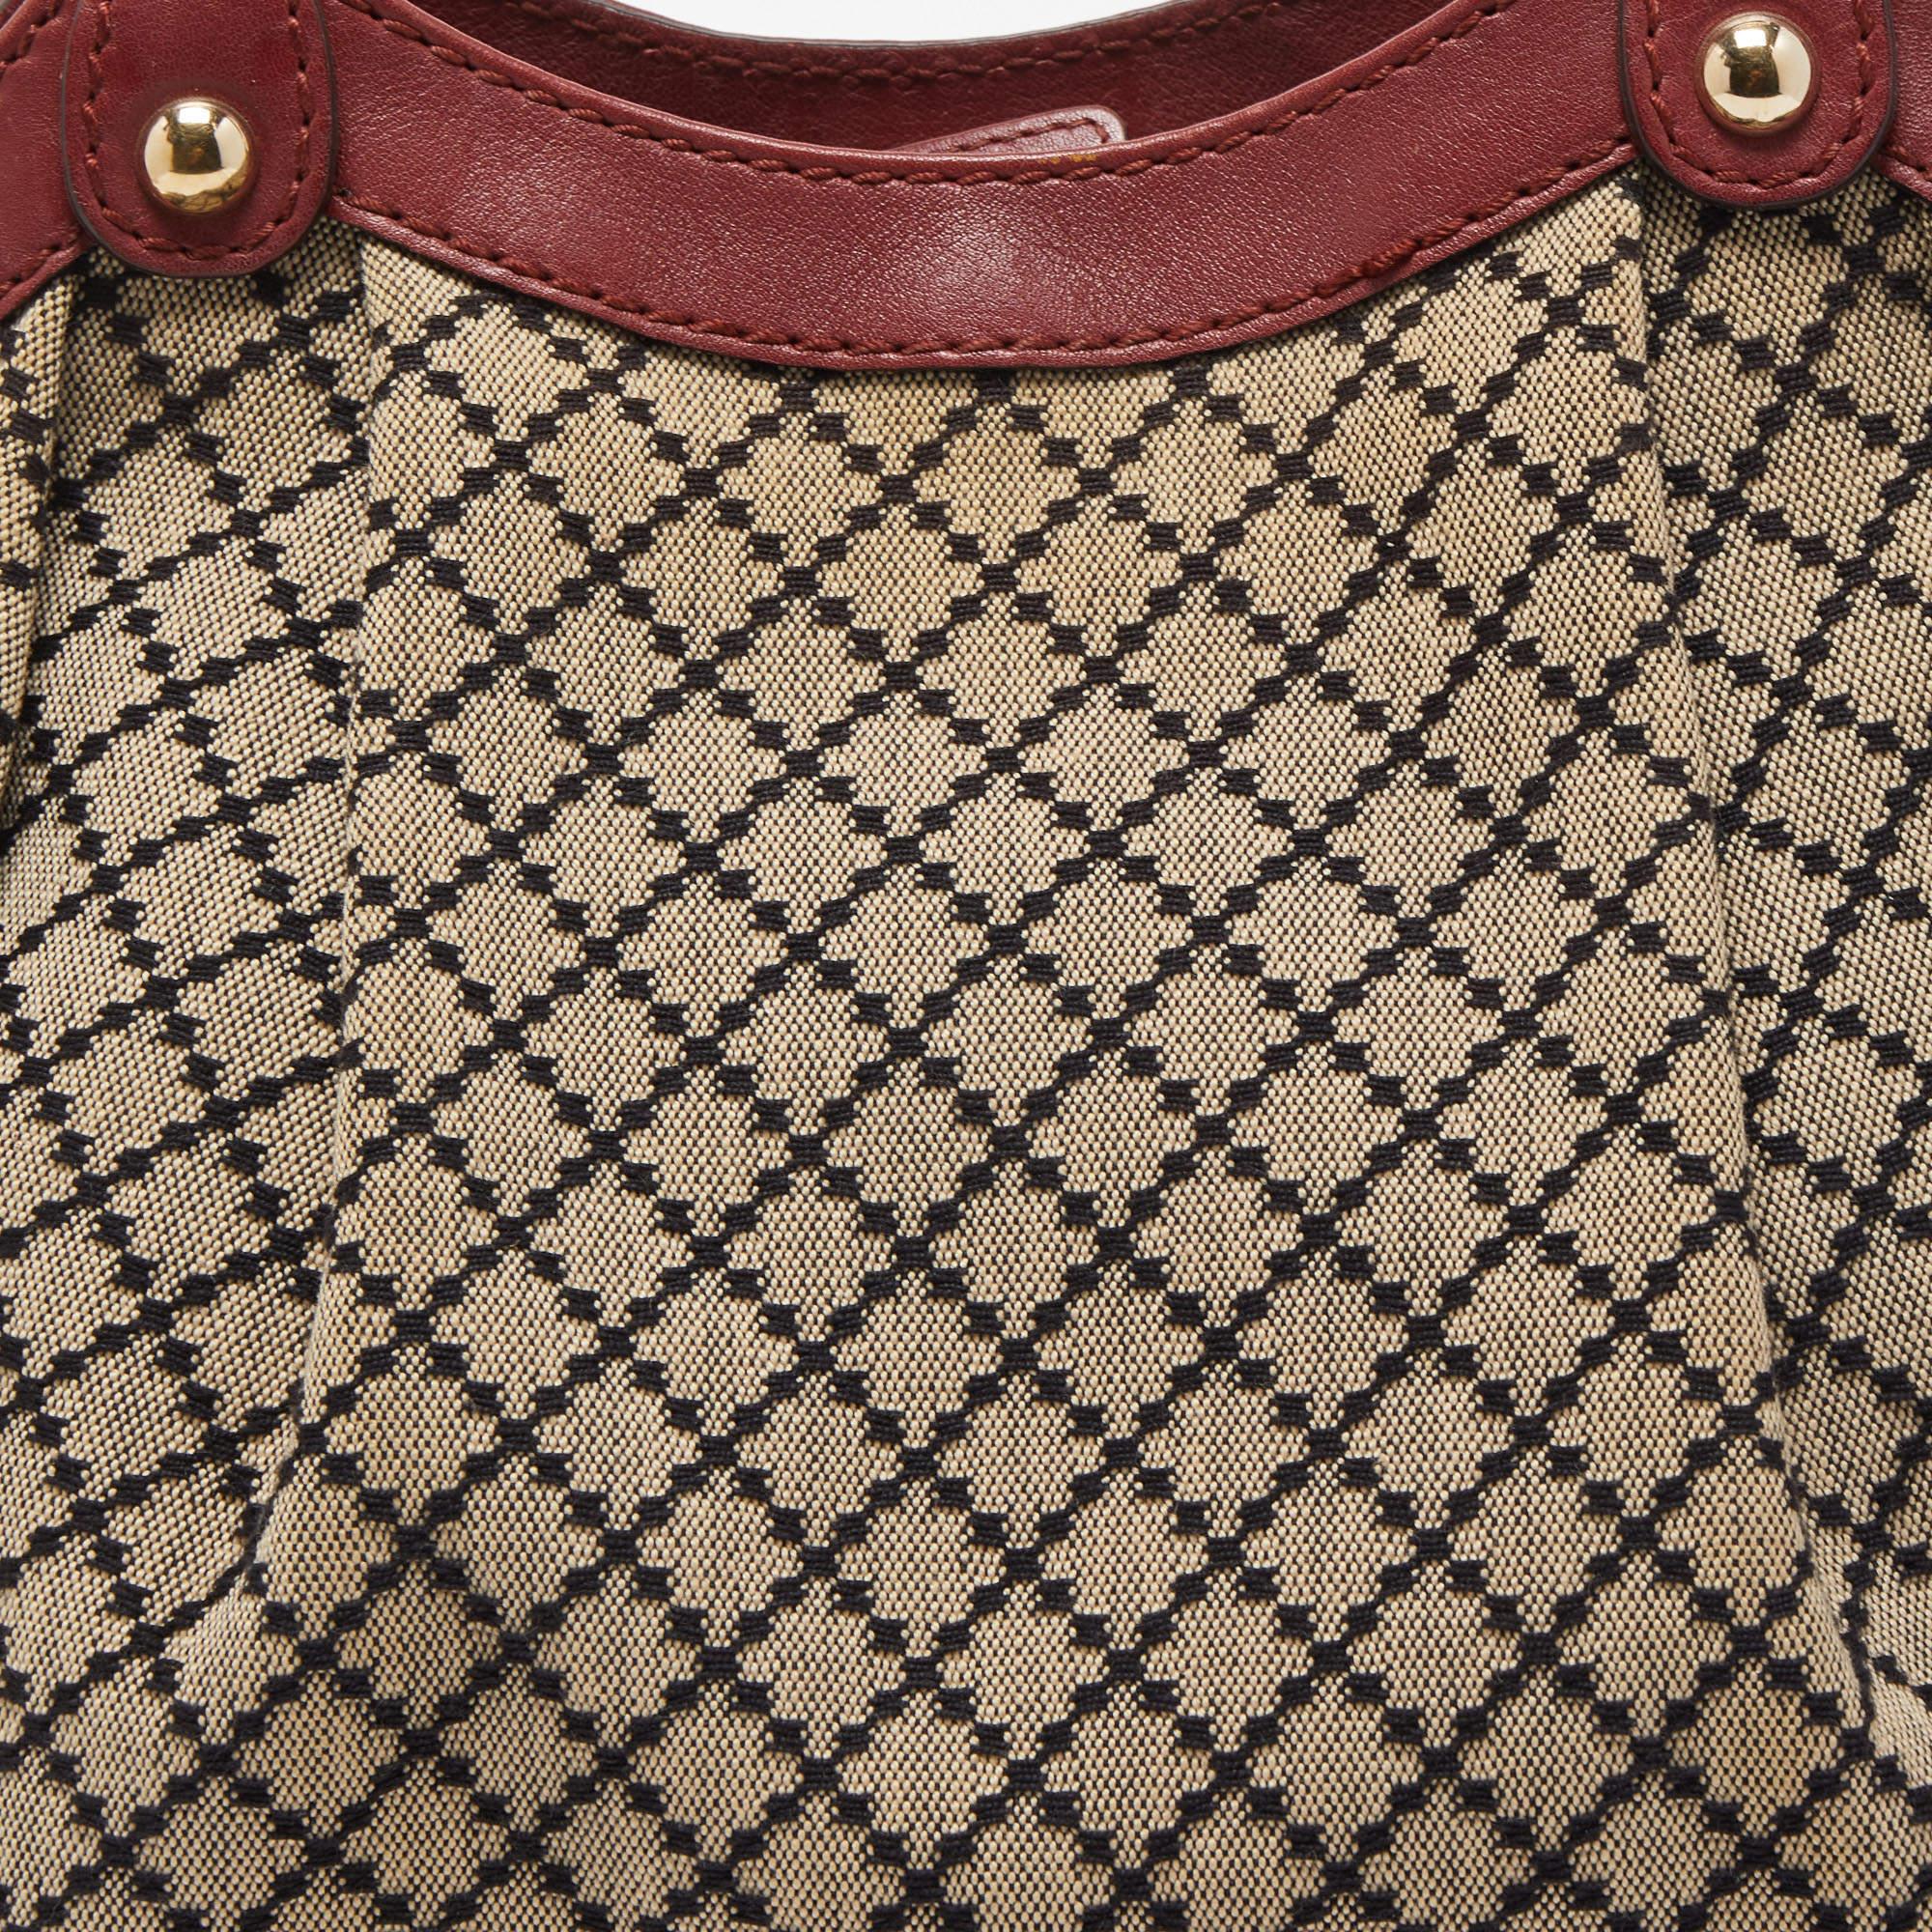 Women's Gucci Red/Beige GG Canvas and Leather Medium Sukey Tote